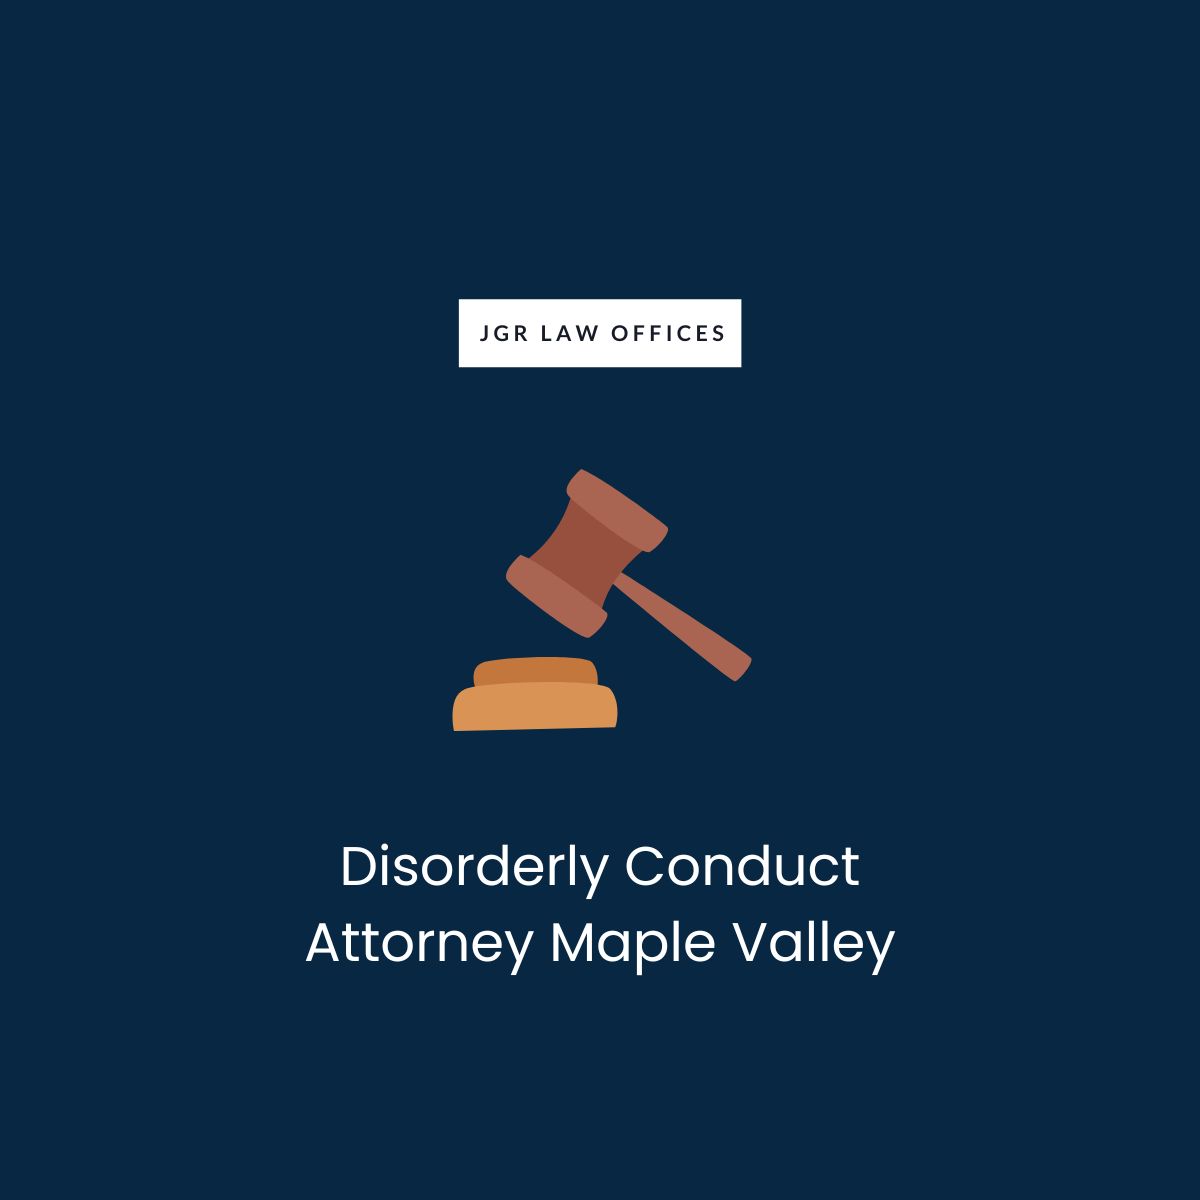 Disorderly Conduct Lawyer Maple Valley Disorderly Conduct